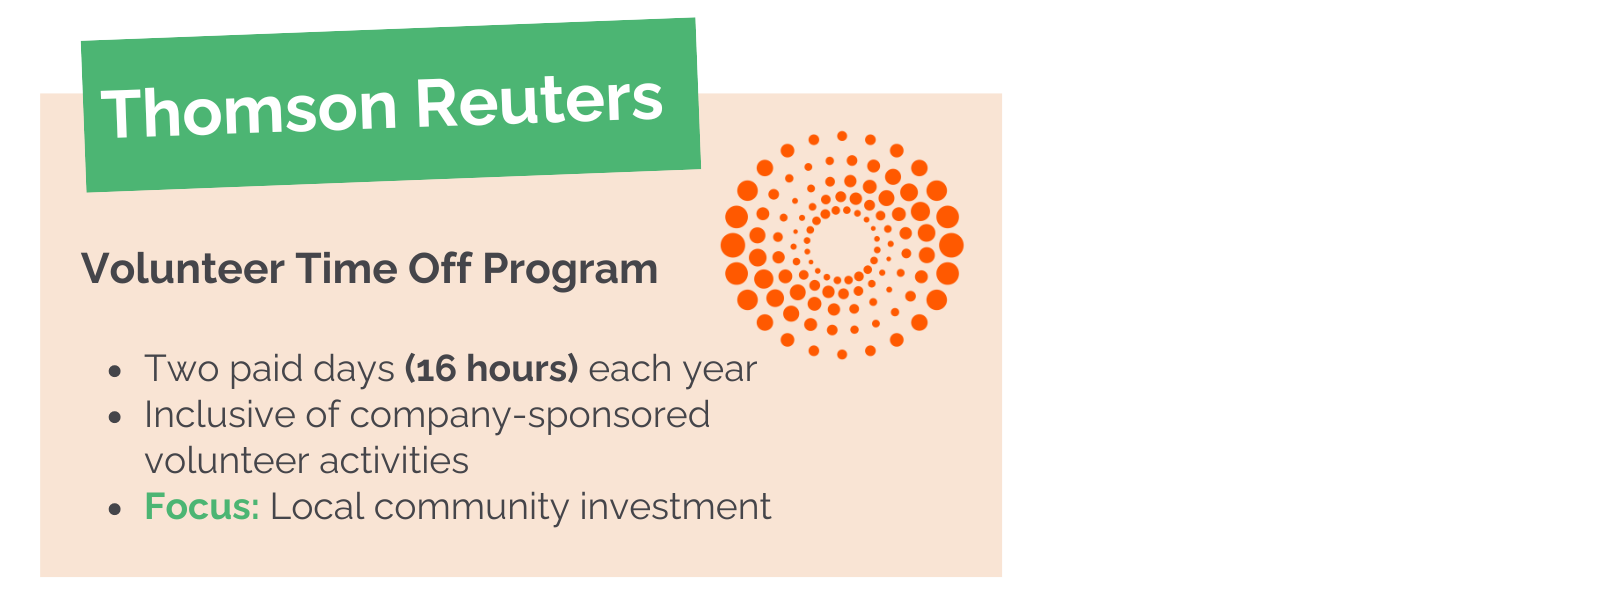 Thomson Reuters offers paid volunteer time off programs for its employees.